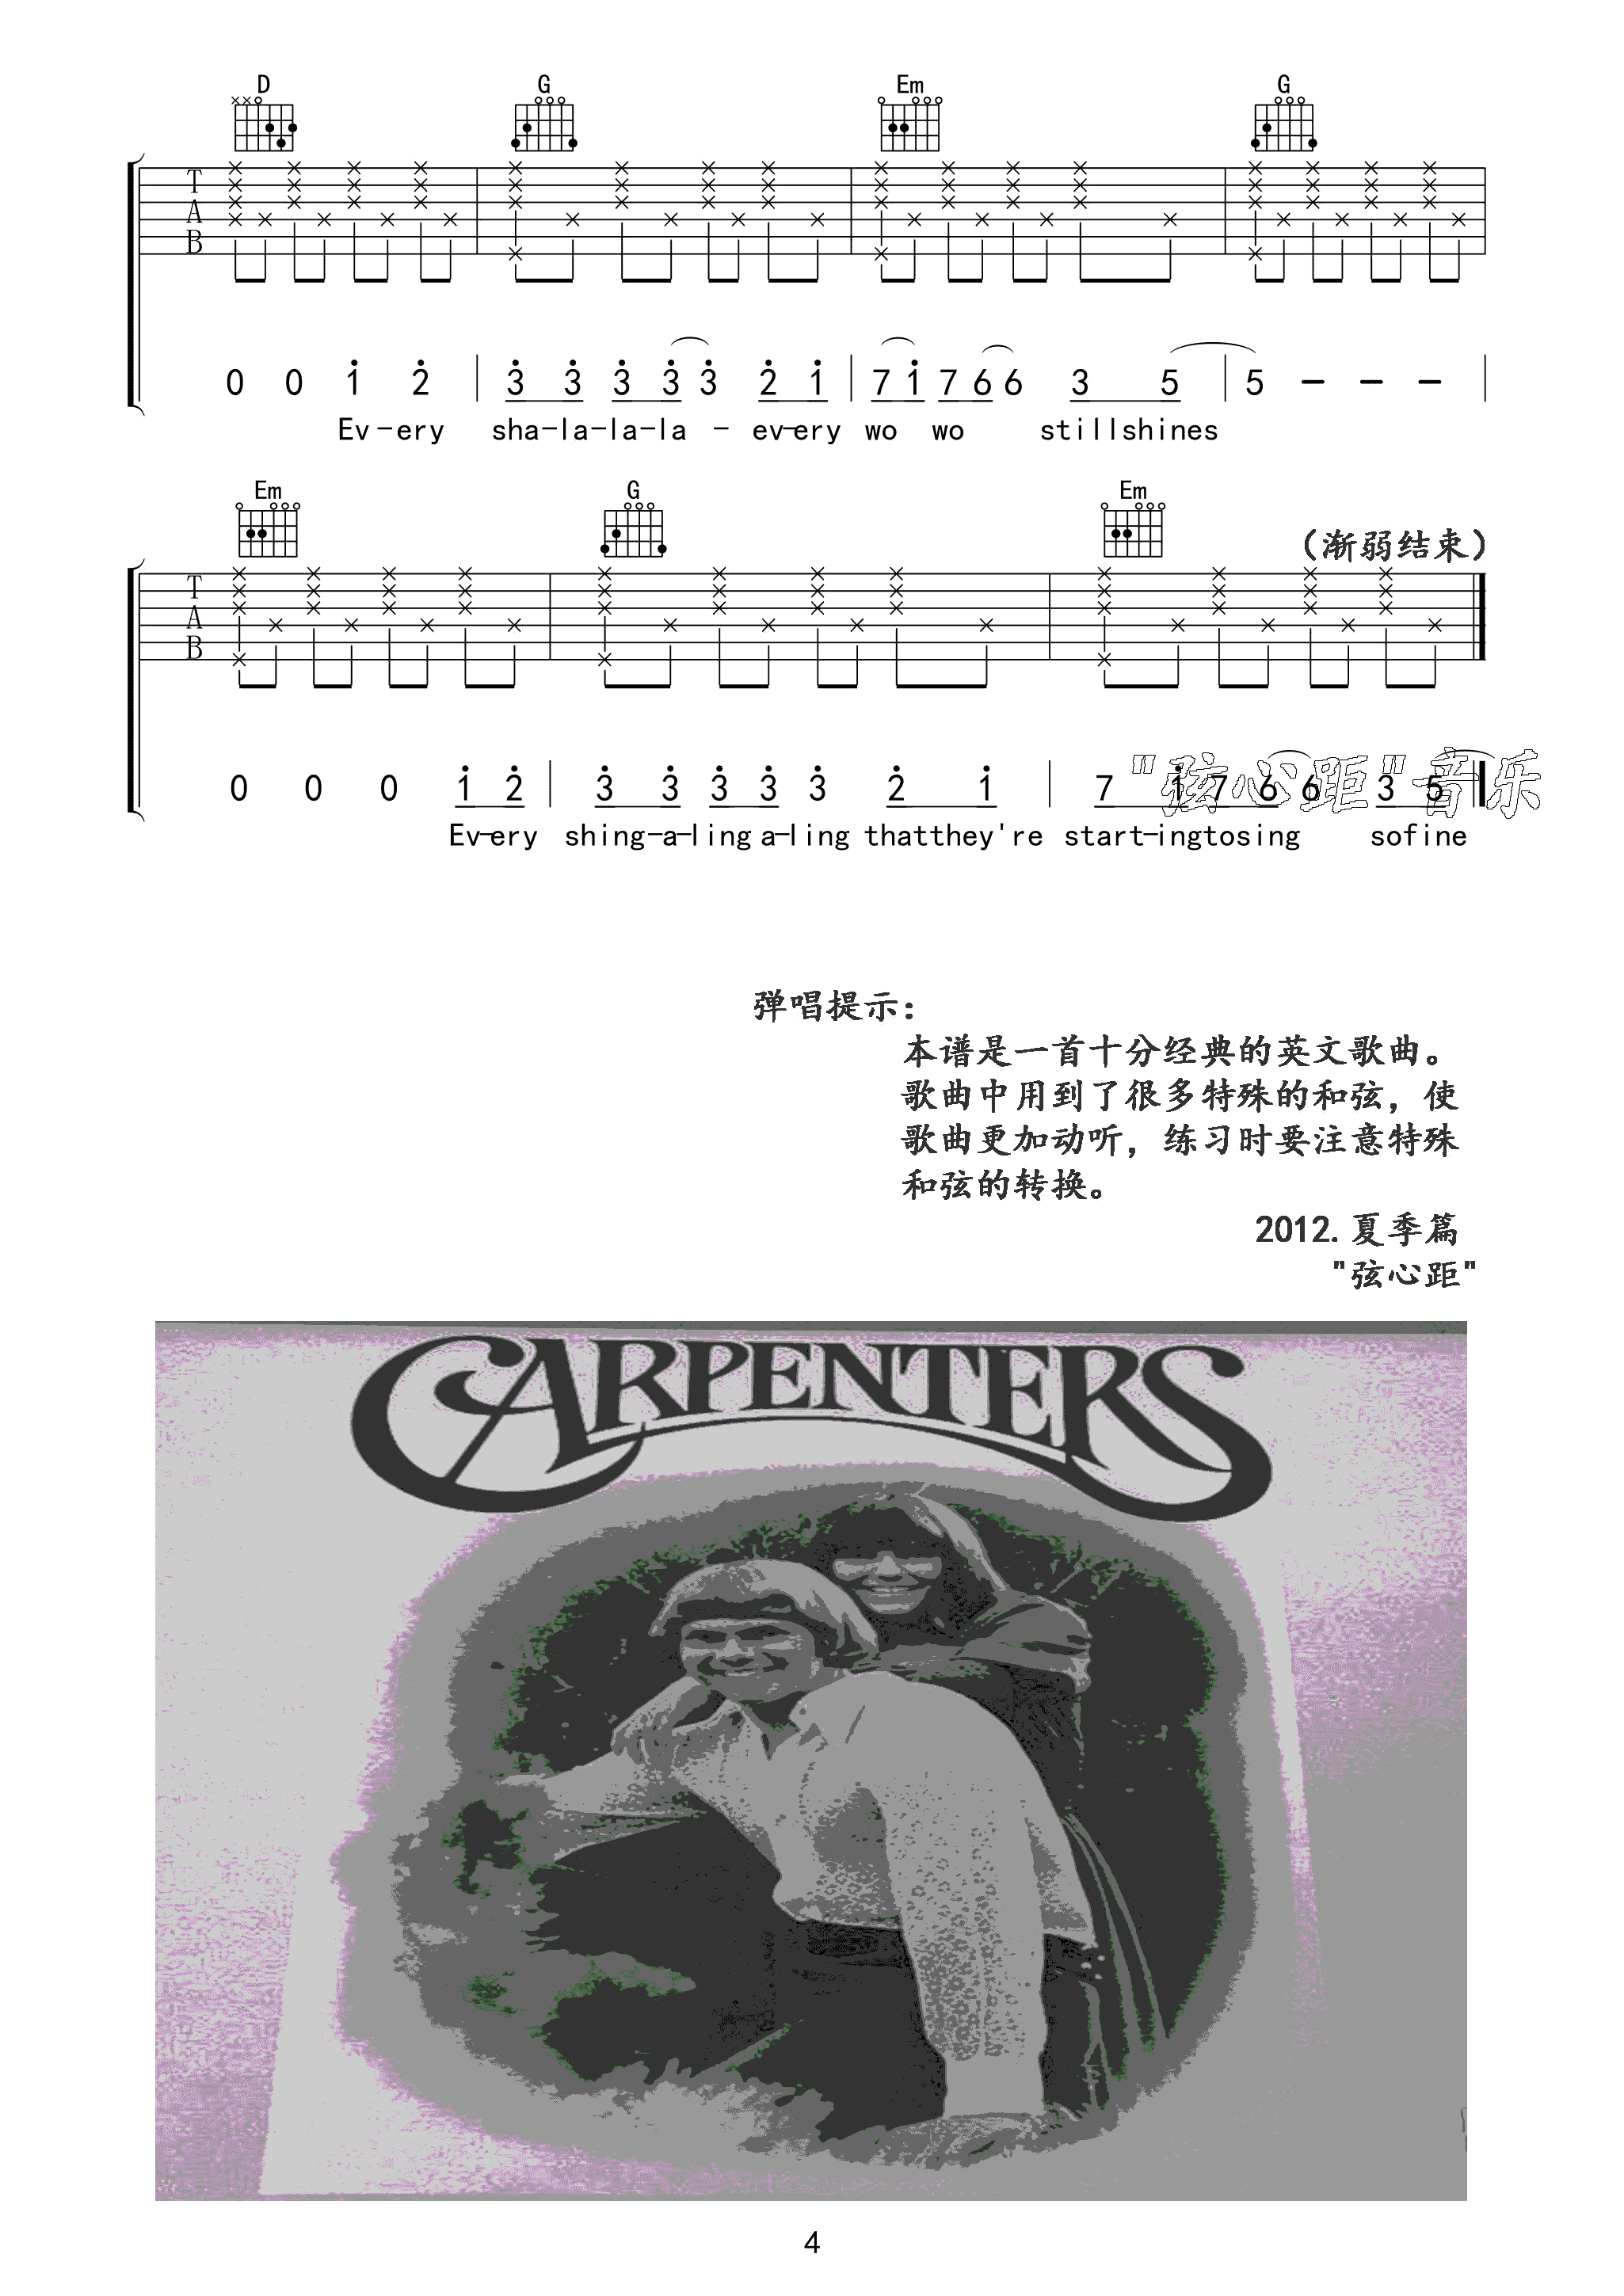 Yesterday Once More吉他谱 G调高清版_弦心距编配_carpenters4